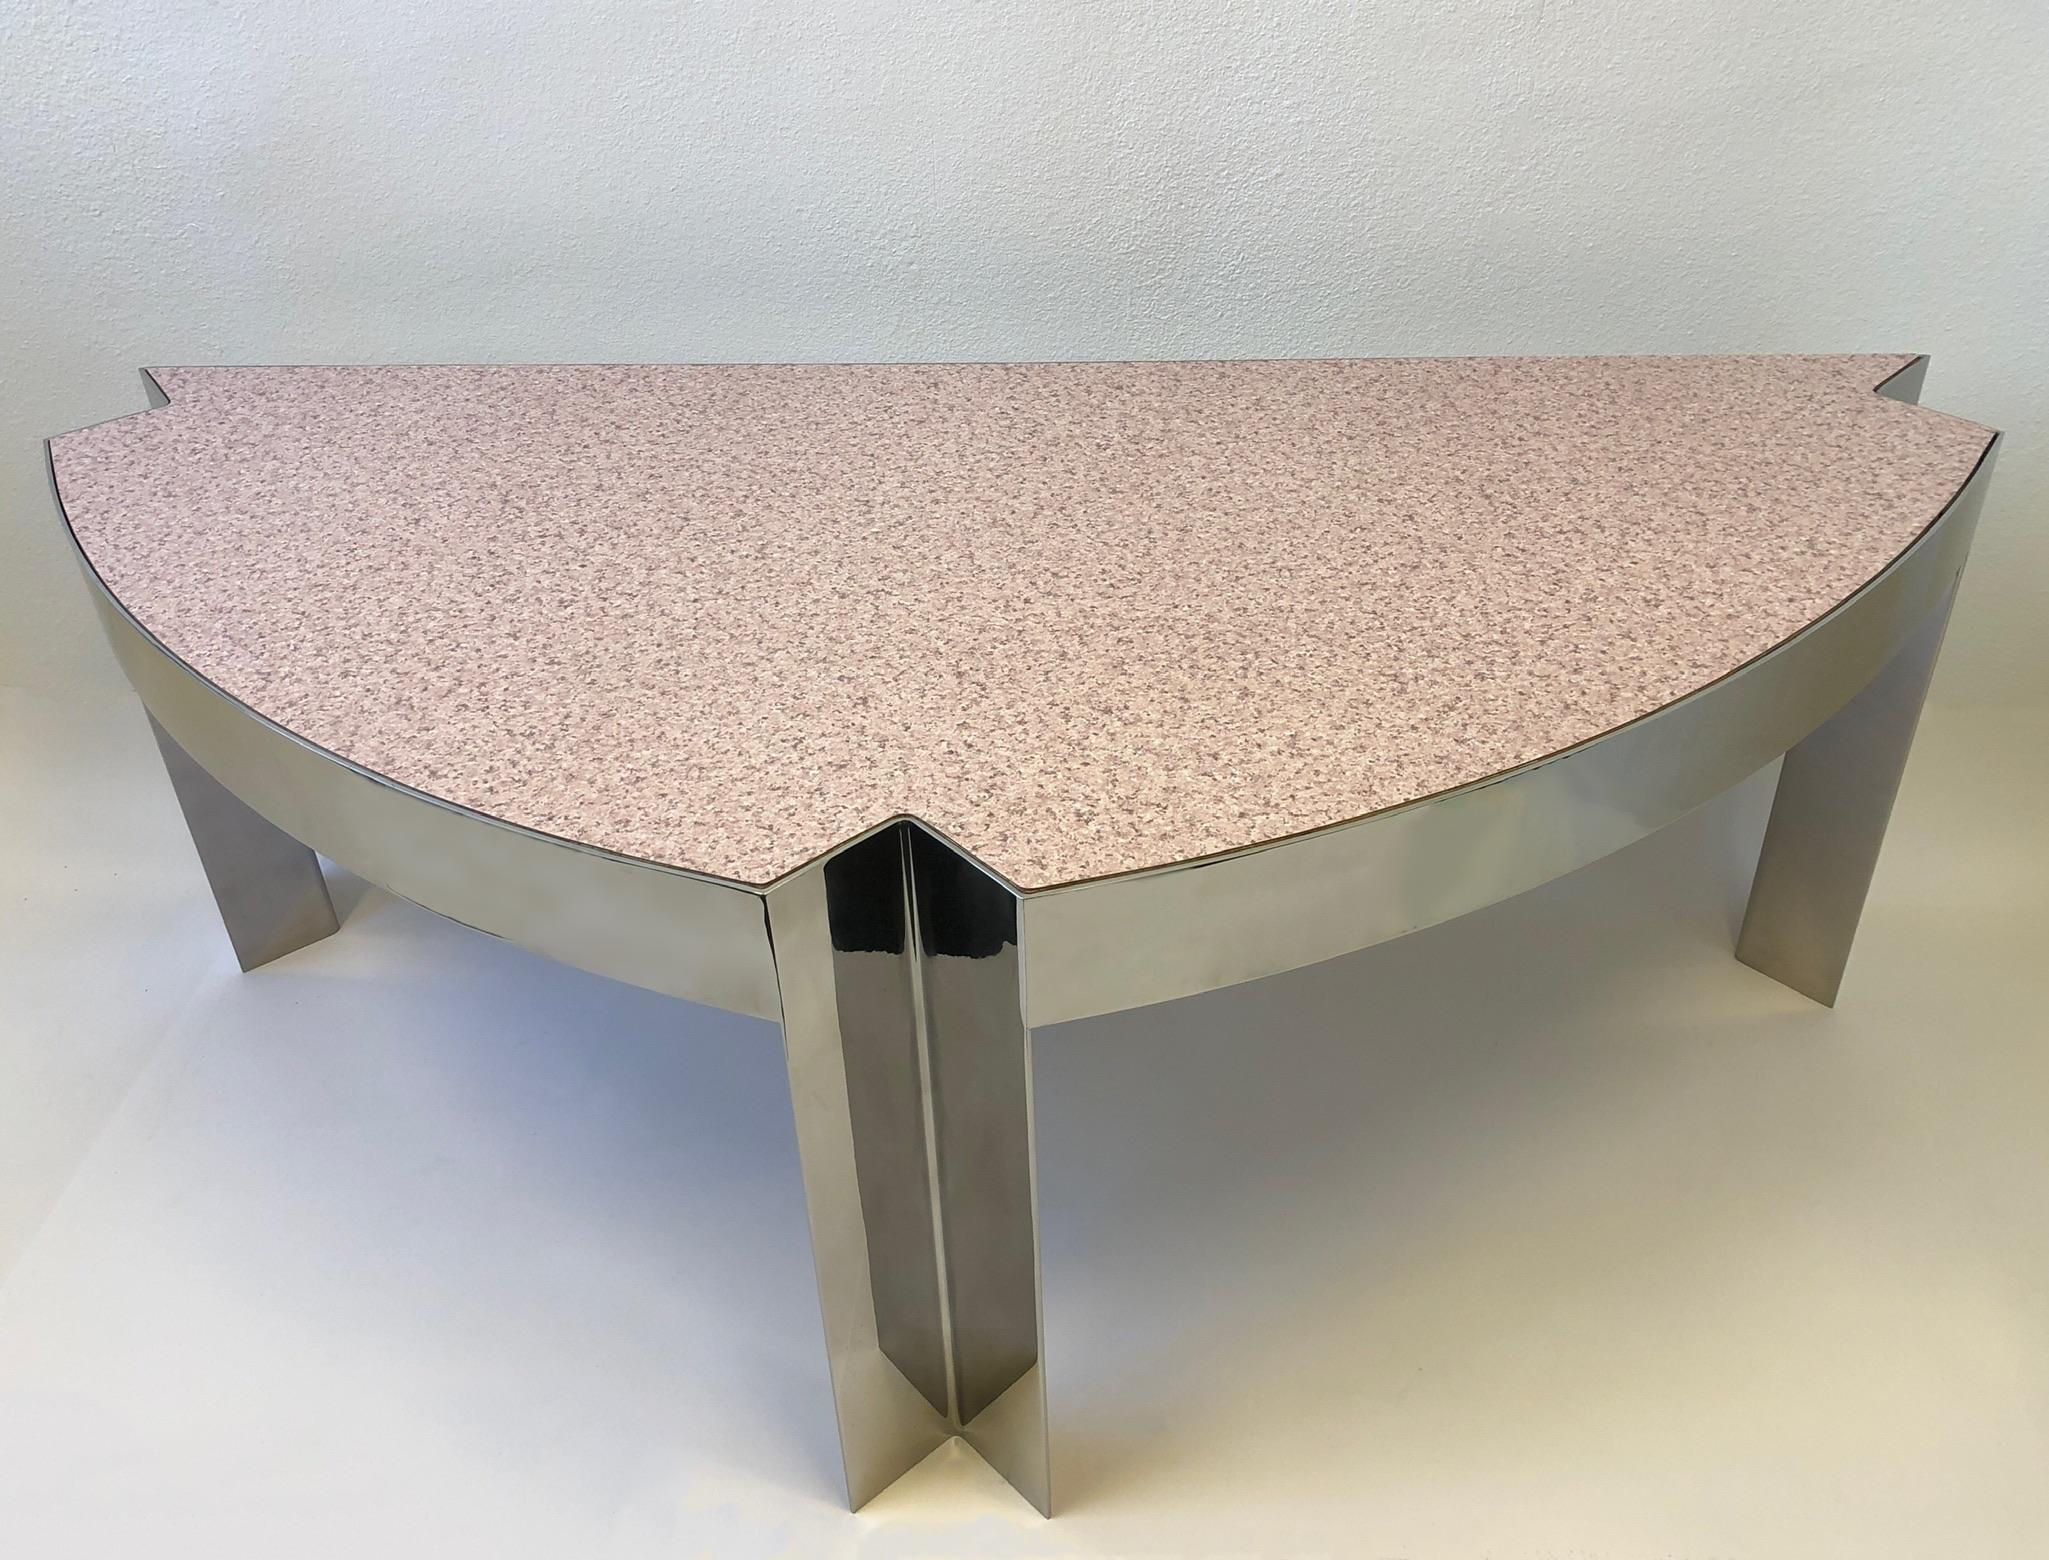 Glamorous 1970’s polish aluminum and faux pink granite Formica top “Mezzaluna” desk by Leon Rosen for Pace Collection. 
Constructed of solid polished aluminum with an inset faux pink granite Formica top. 
It has no drawers, so it can be used as a